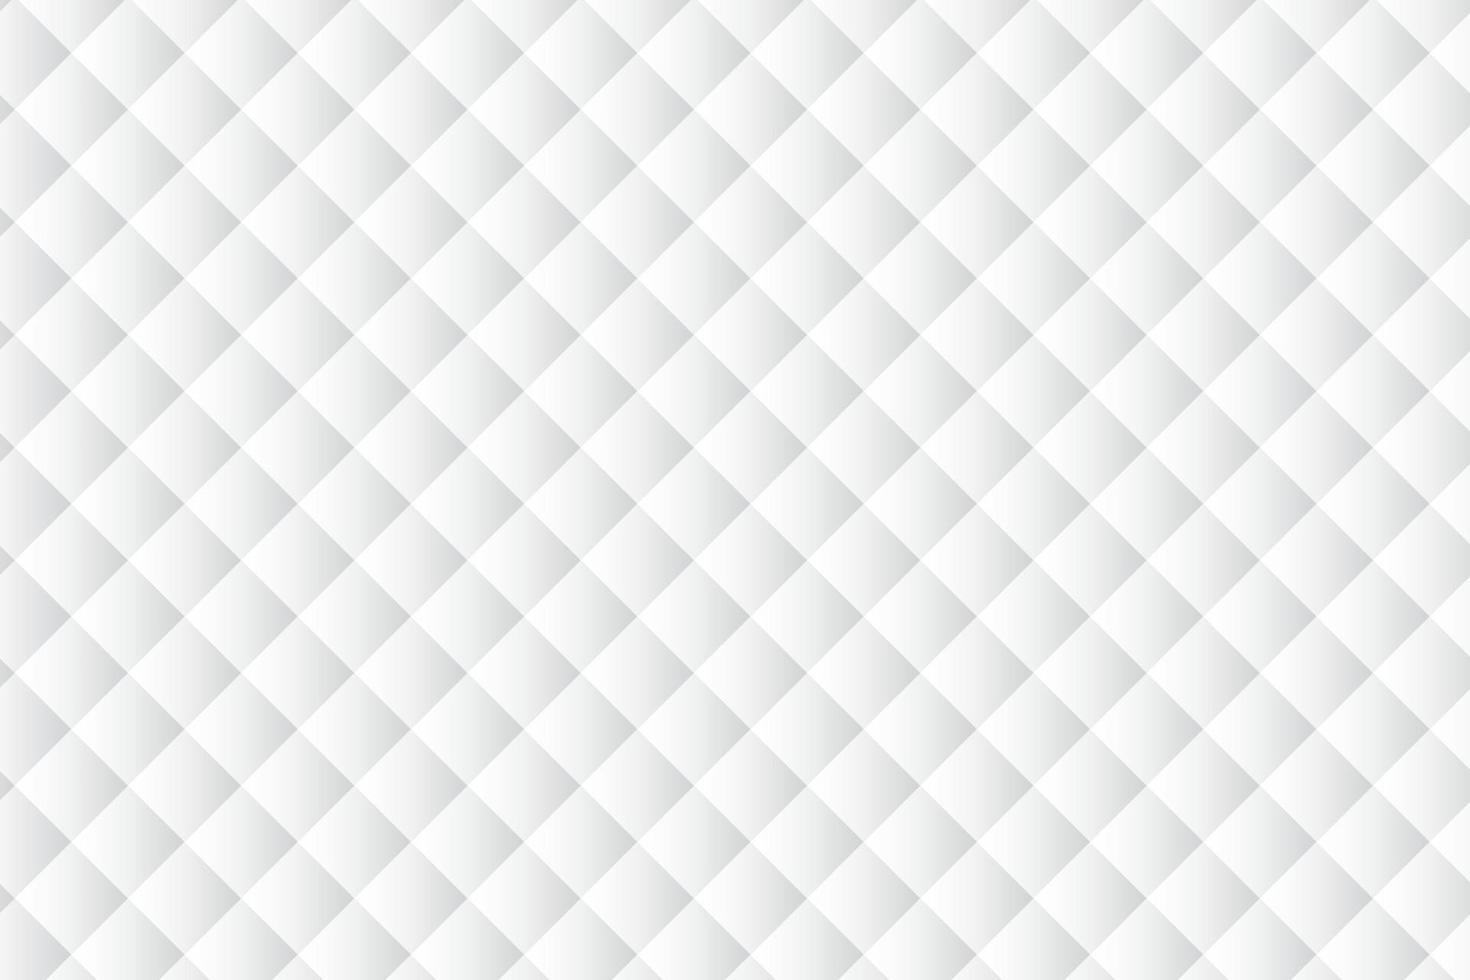 Pattern with geometric elements in white-gray tones. Abstract Gradient Background vector